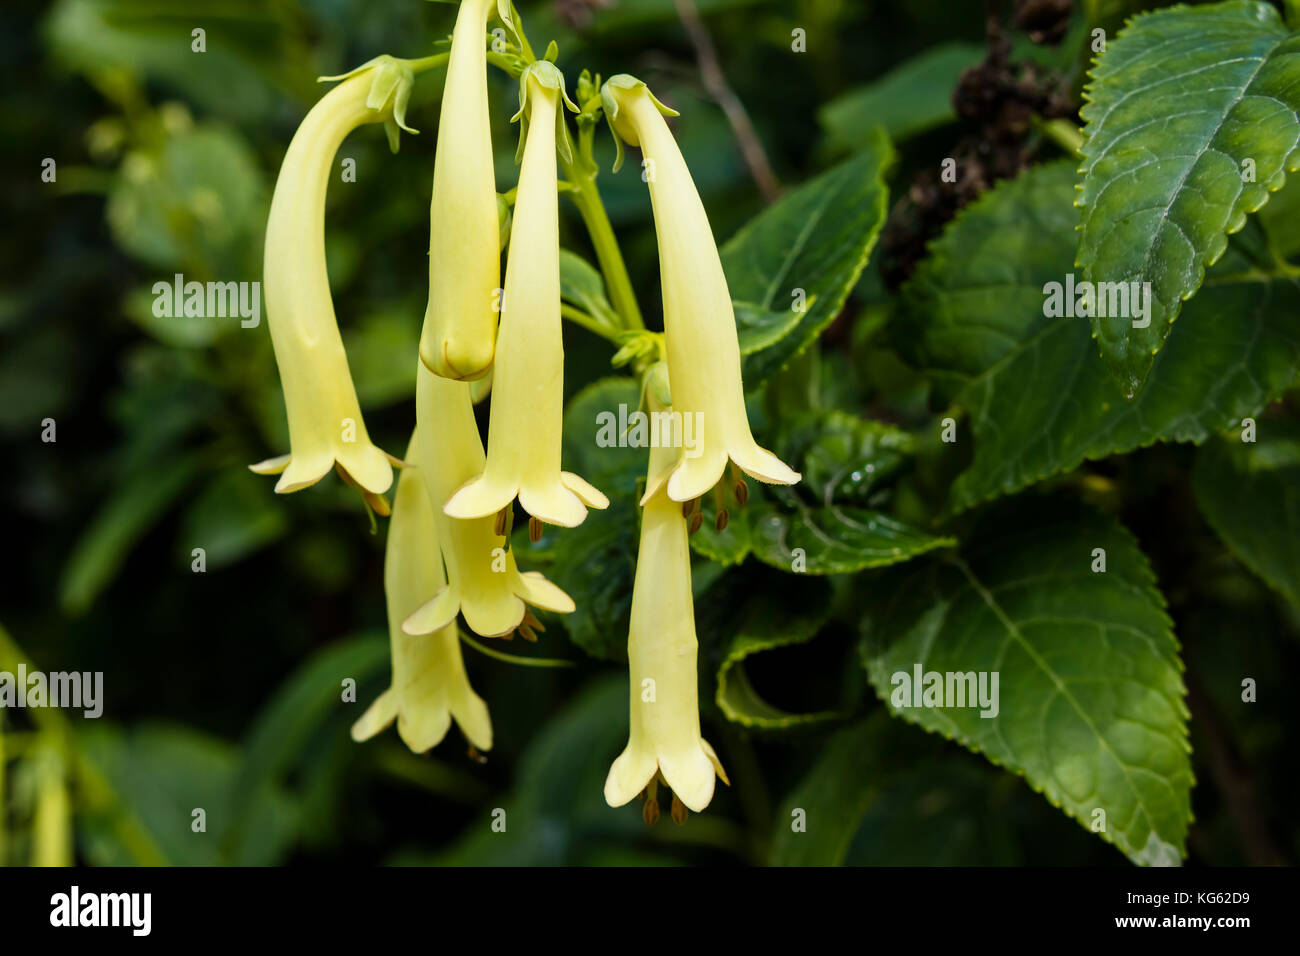 Small drooping tubular yellow flowers of Phygelius aequalis or Cape Figwort. Stock Photo